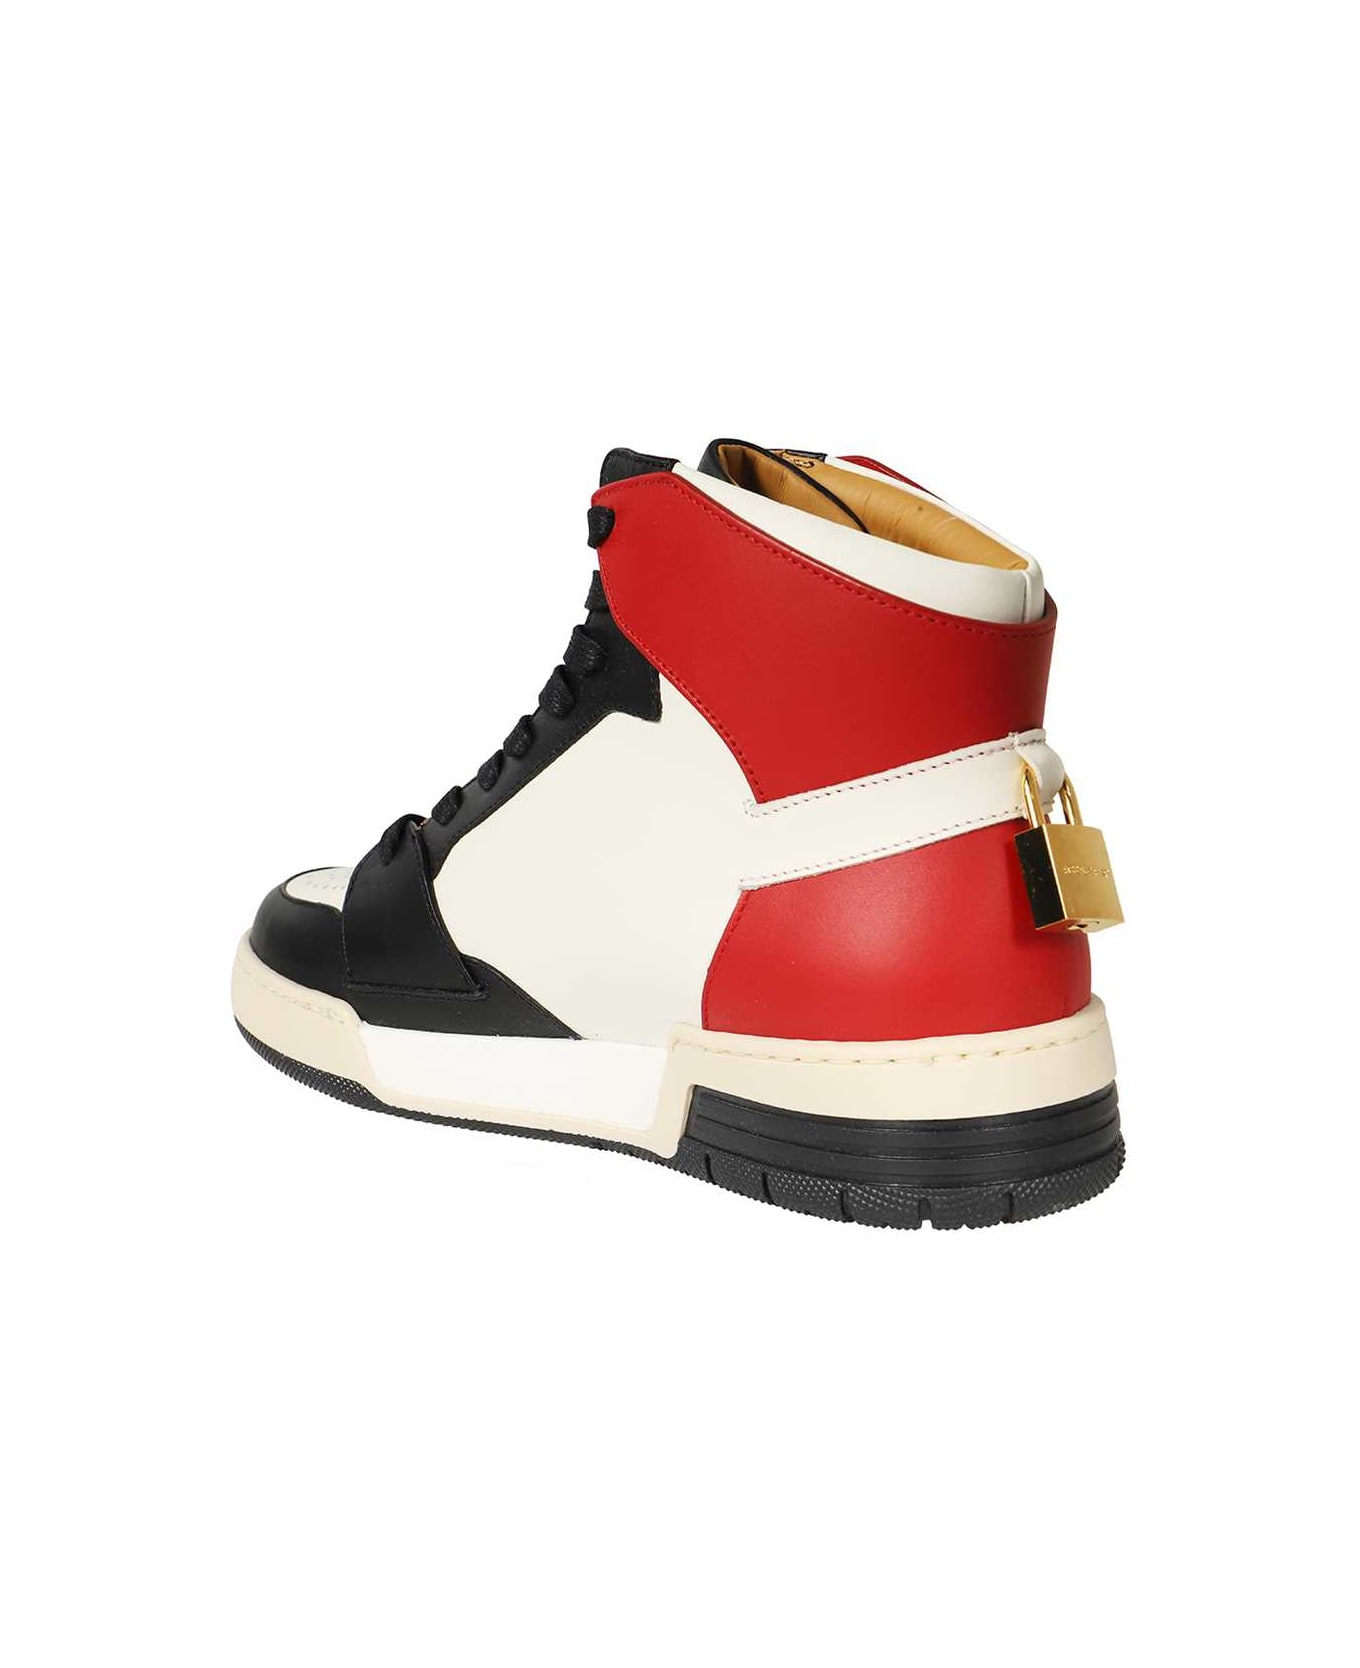 Buscemi Leather High-top Sneakers - red スニーカー